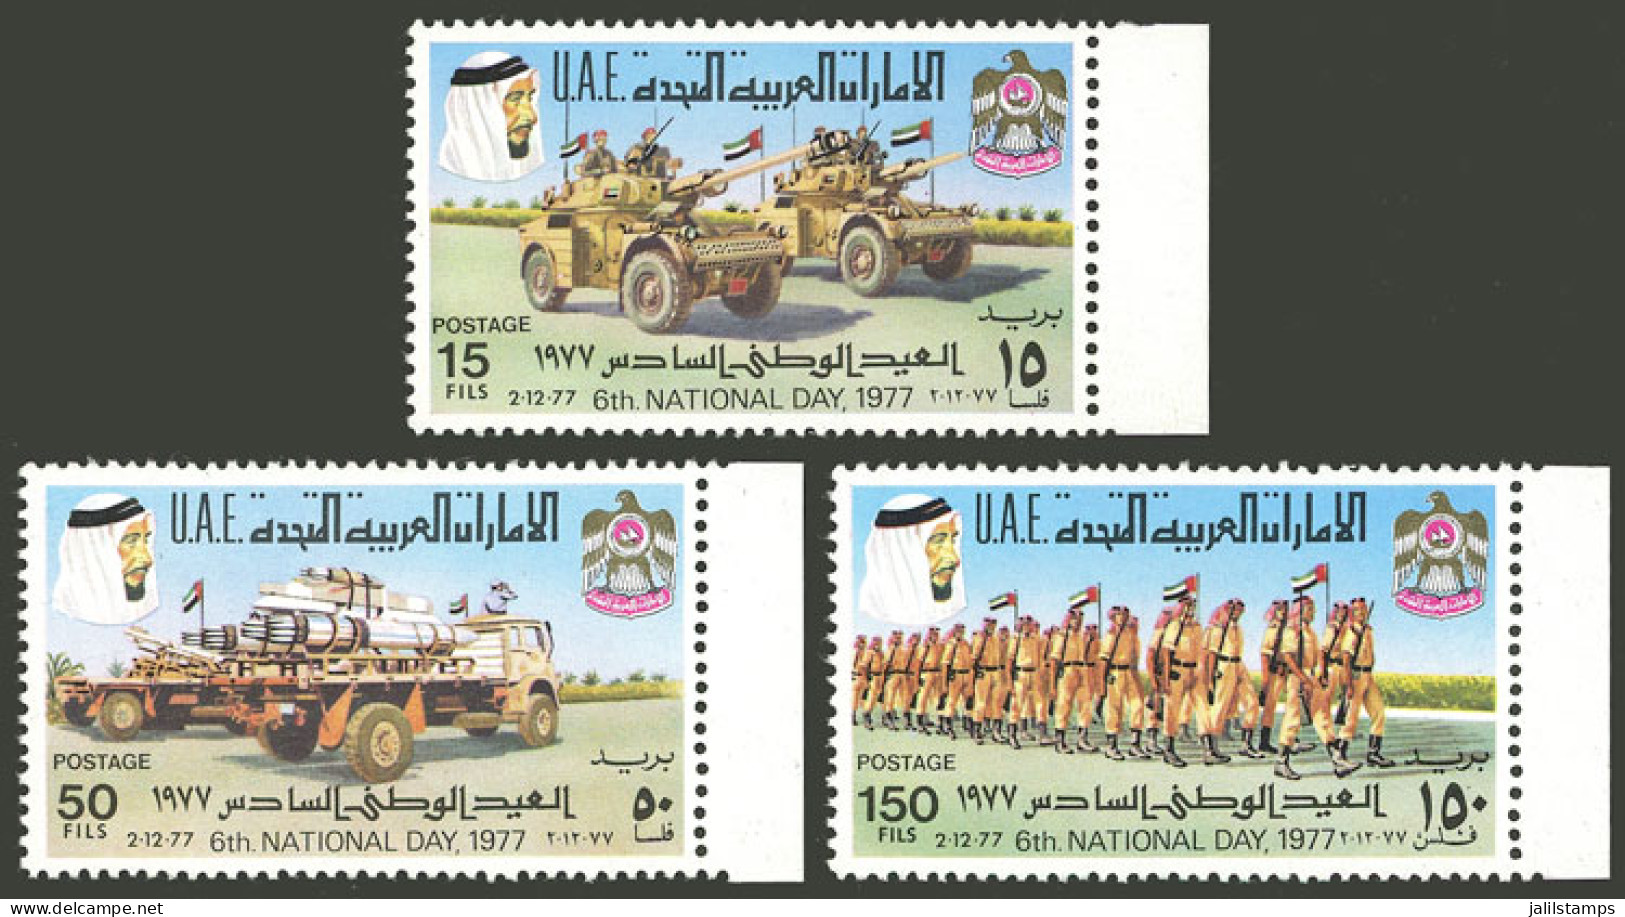 UNITED ARAB EMIRATES: 1977 National Day (soldiers And War Vehicules), Complete Set Of 3 Values Prepared But Unissued, MN - Ver. Arab. Emirate